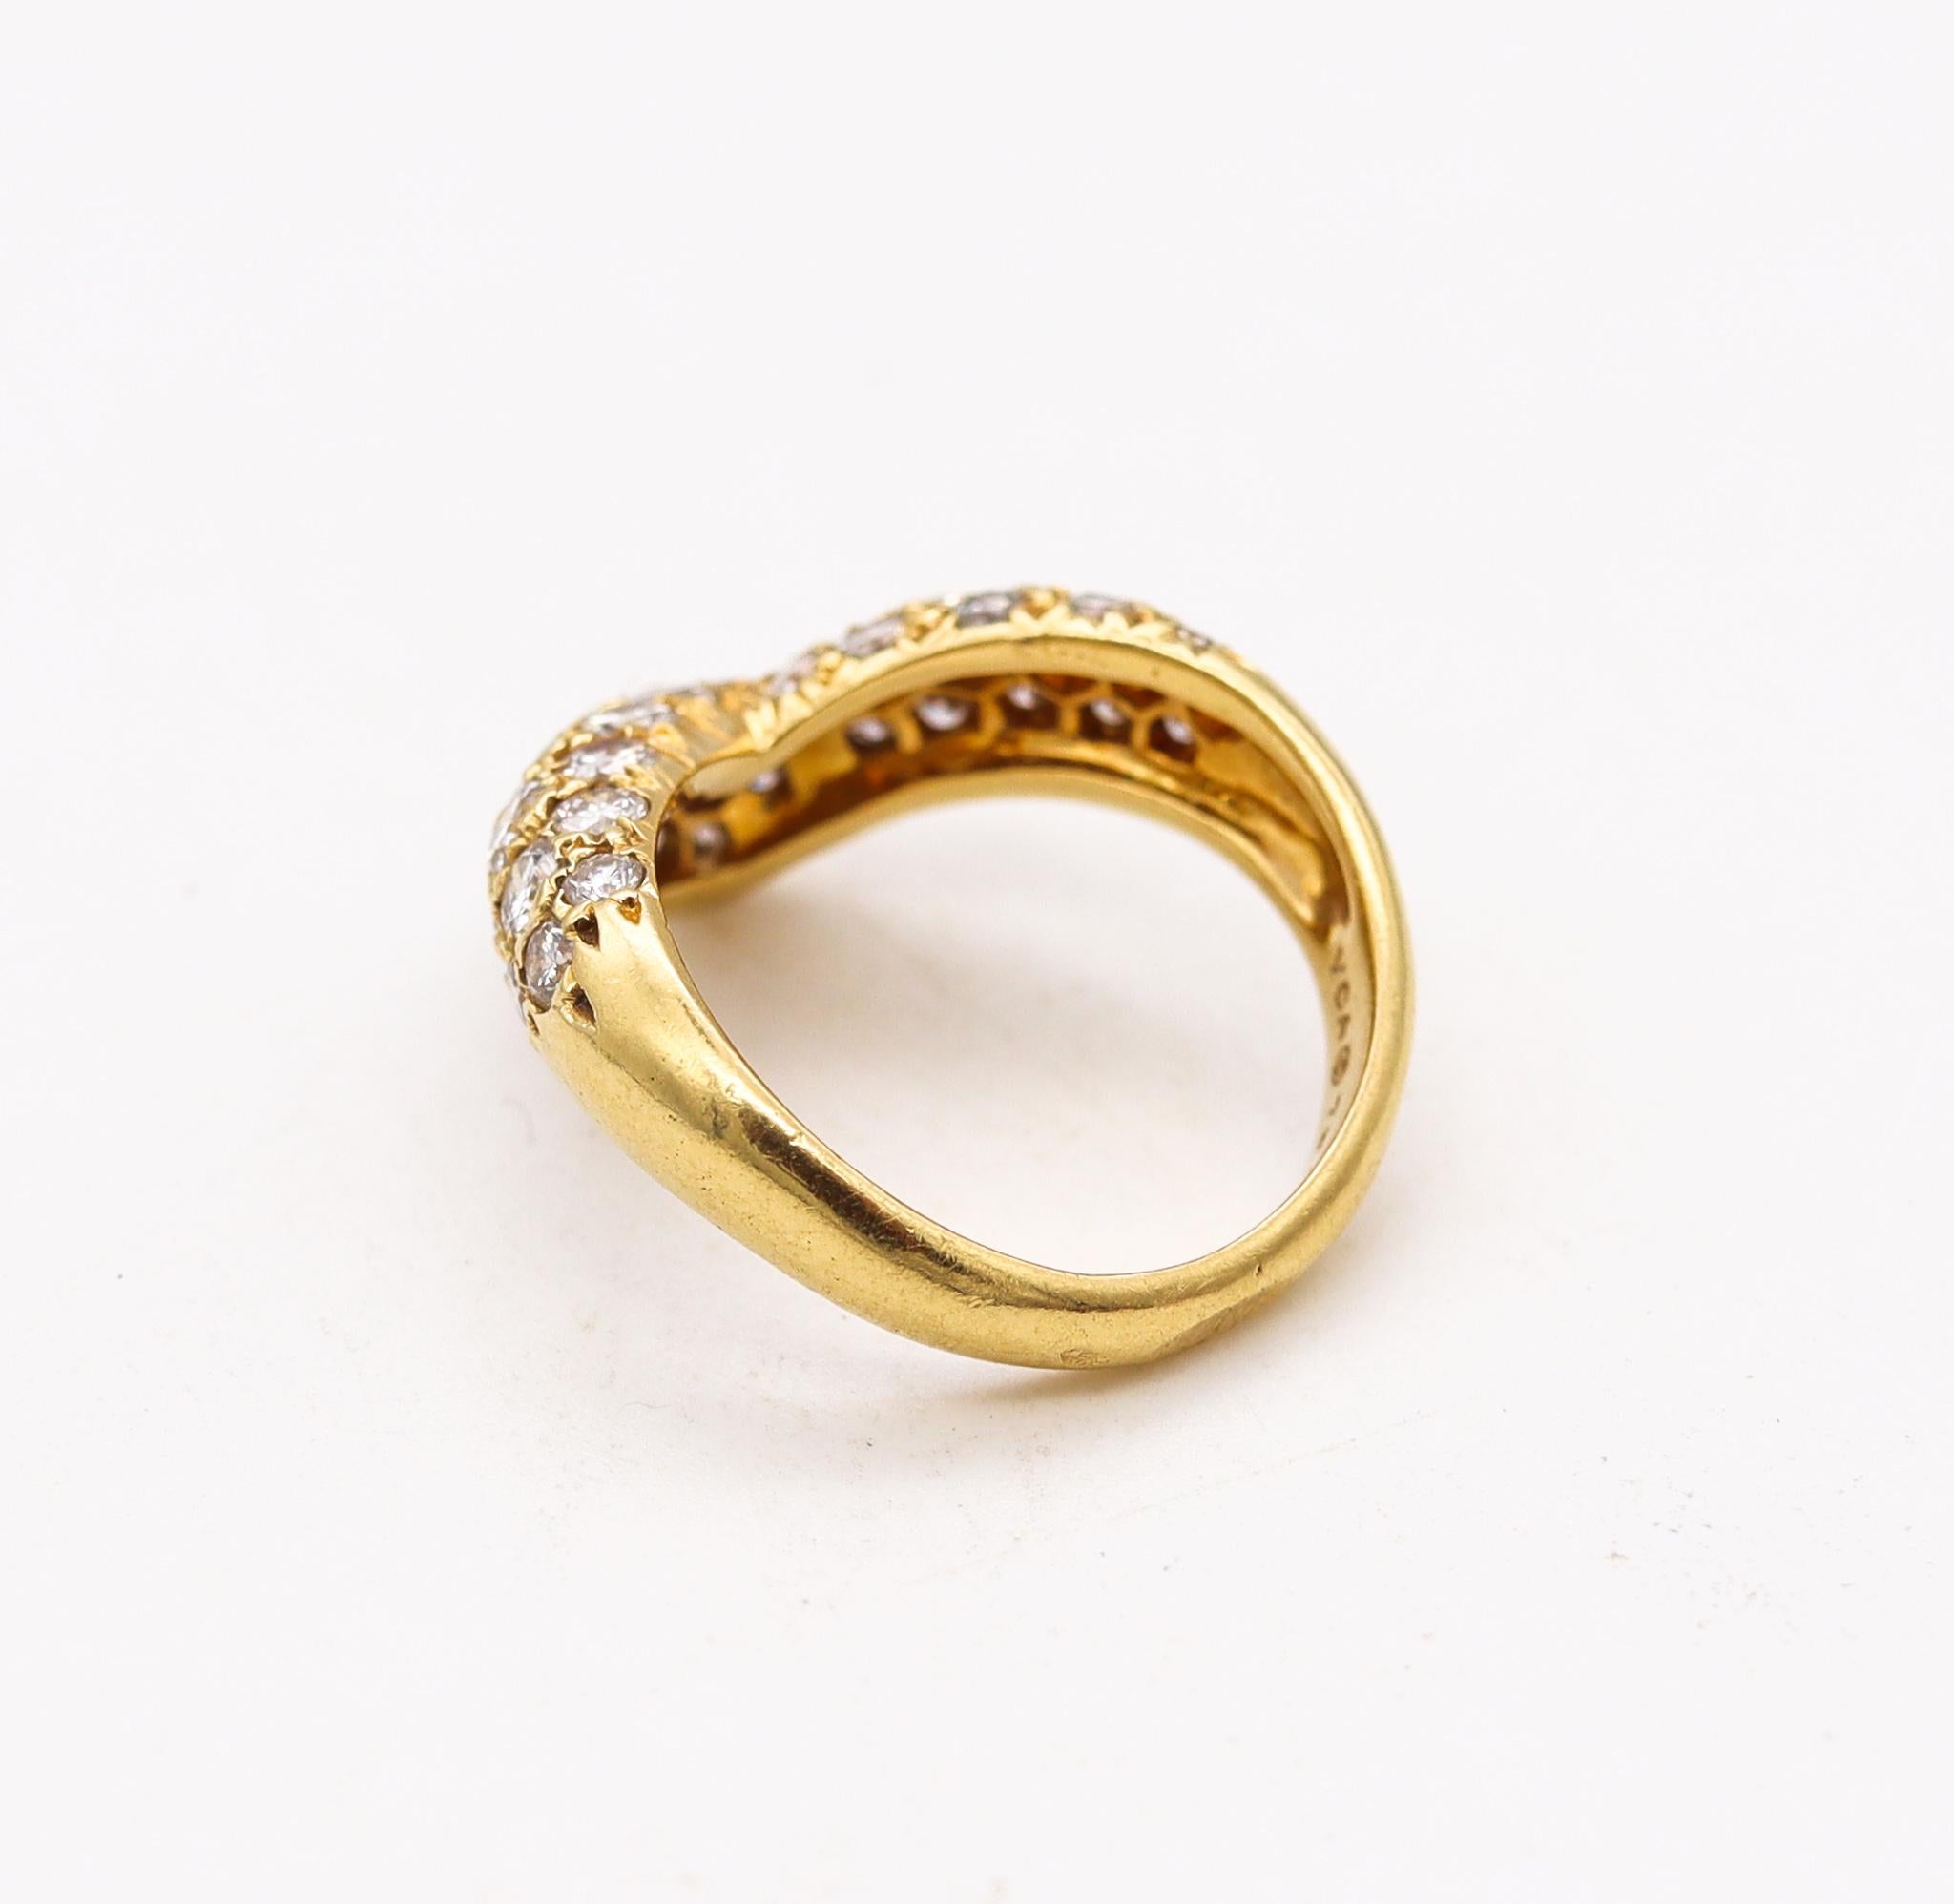 Brilliant Cut Van Cleef & Arpels 1976 Paris v Ring in 18kt Gold with 1.08 Cts in Pave Diamonds